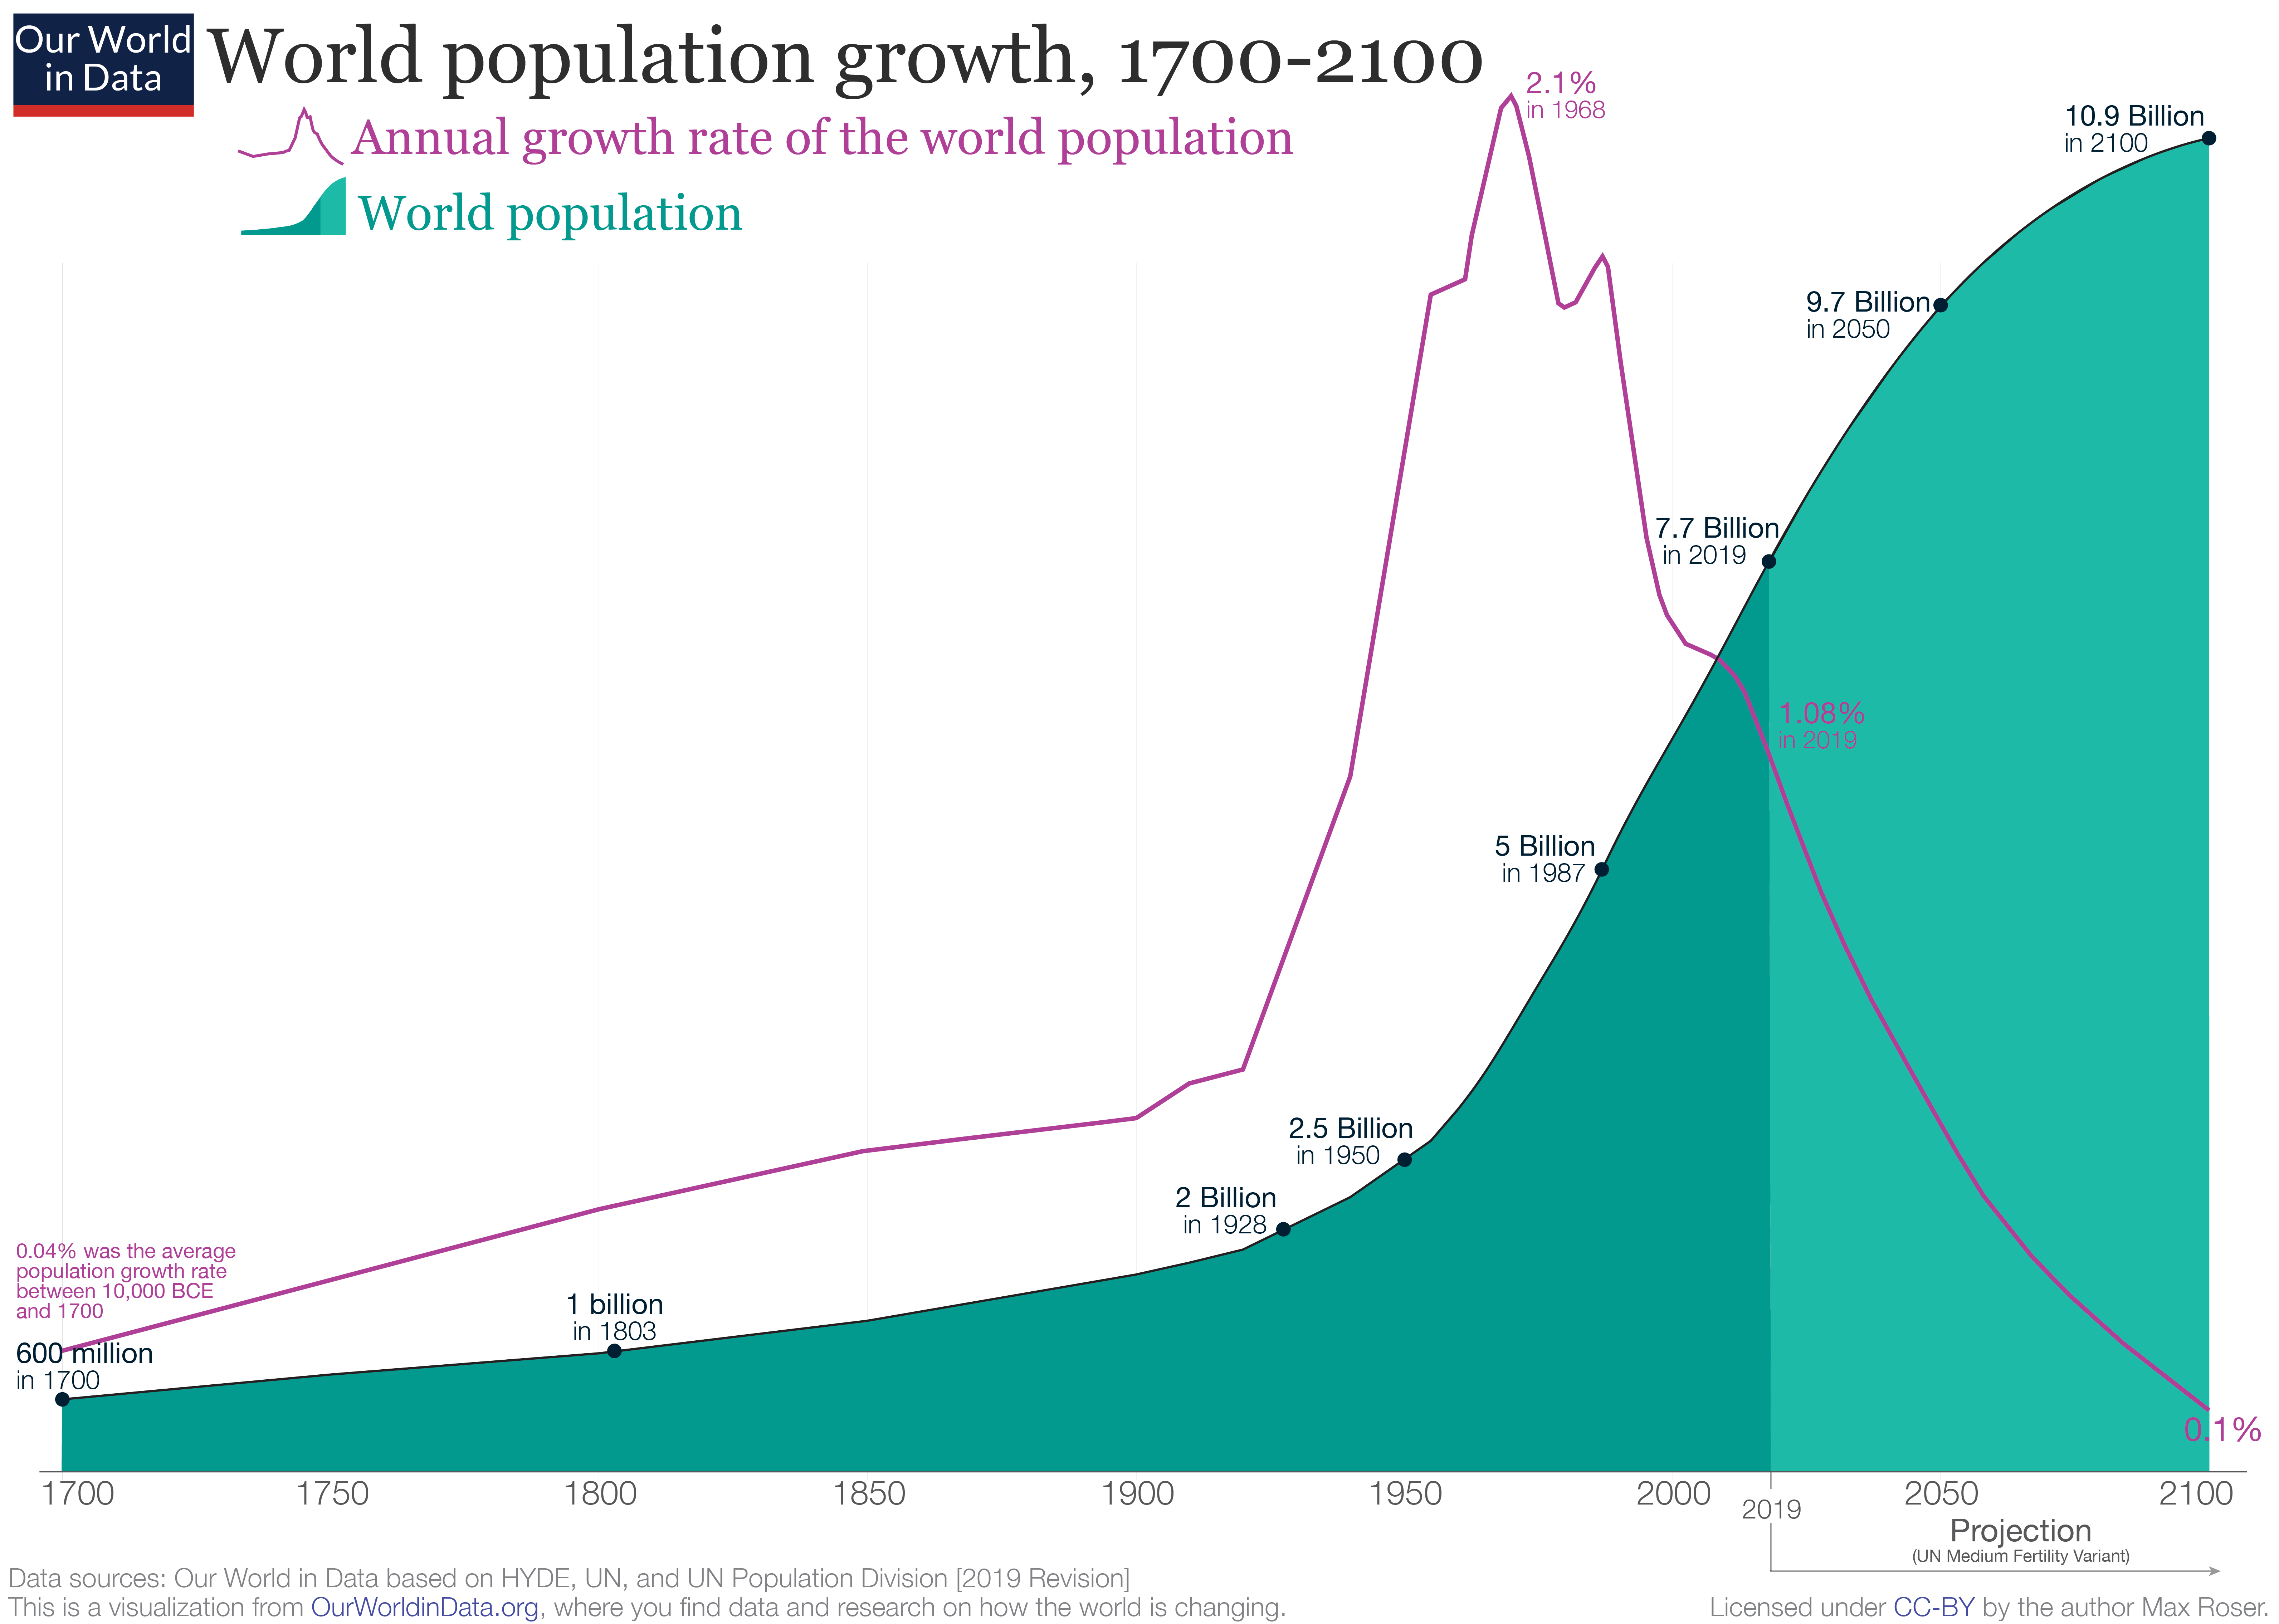 Graph of world population size and population growth rate over time